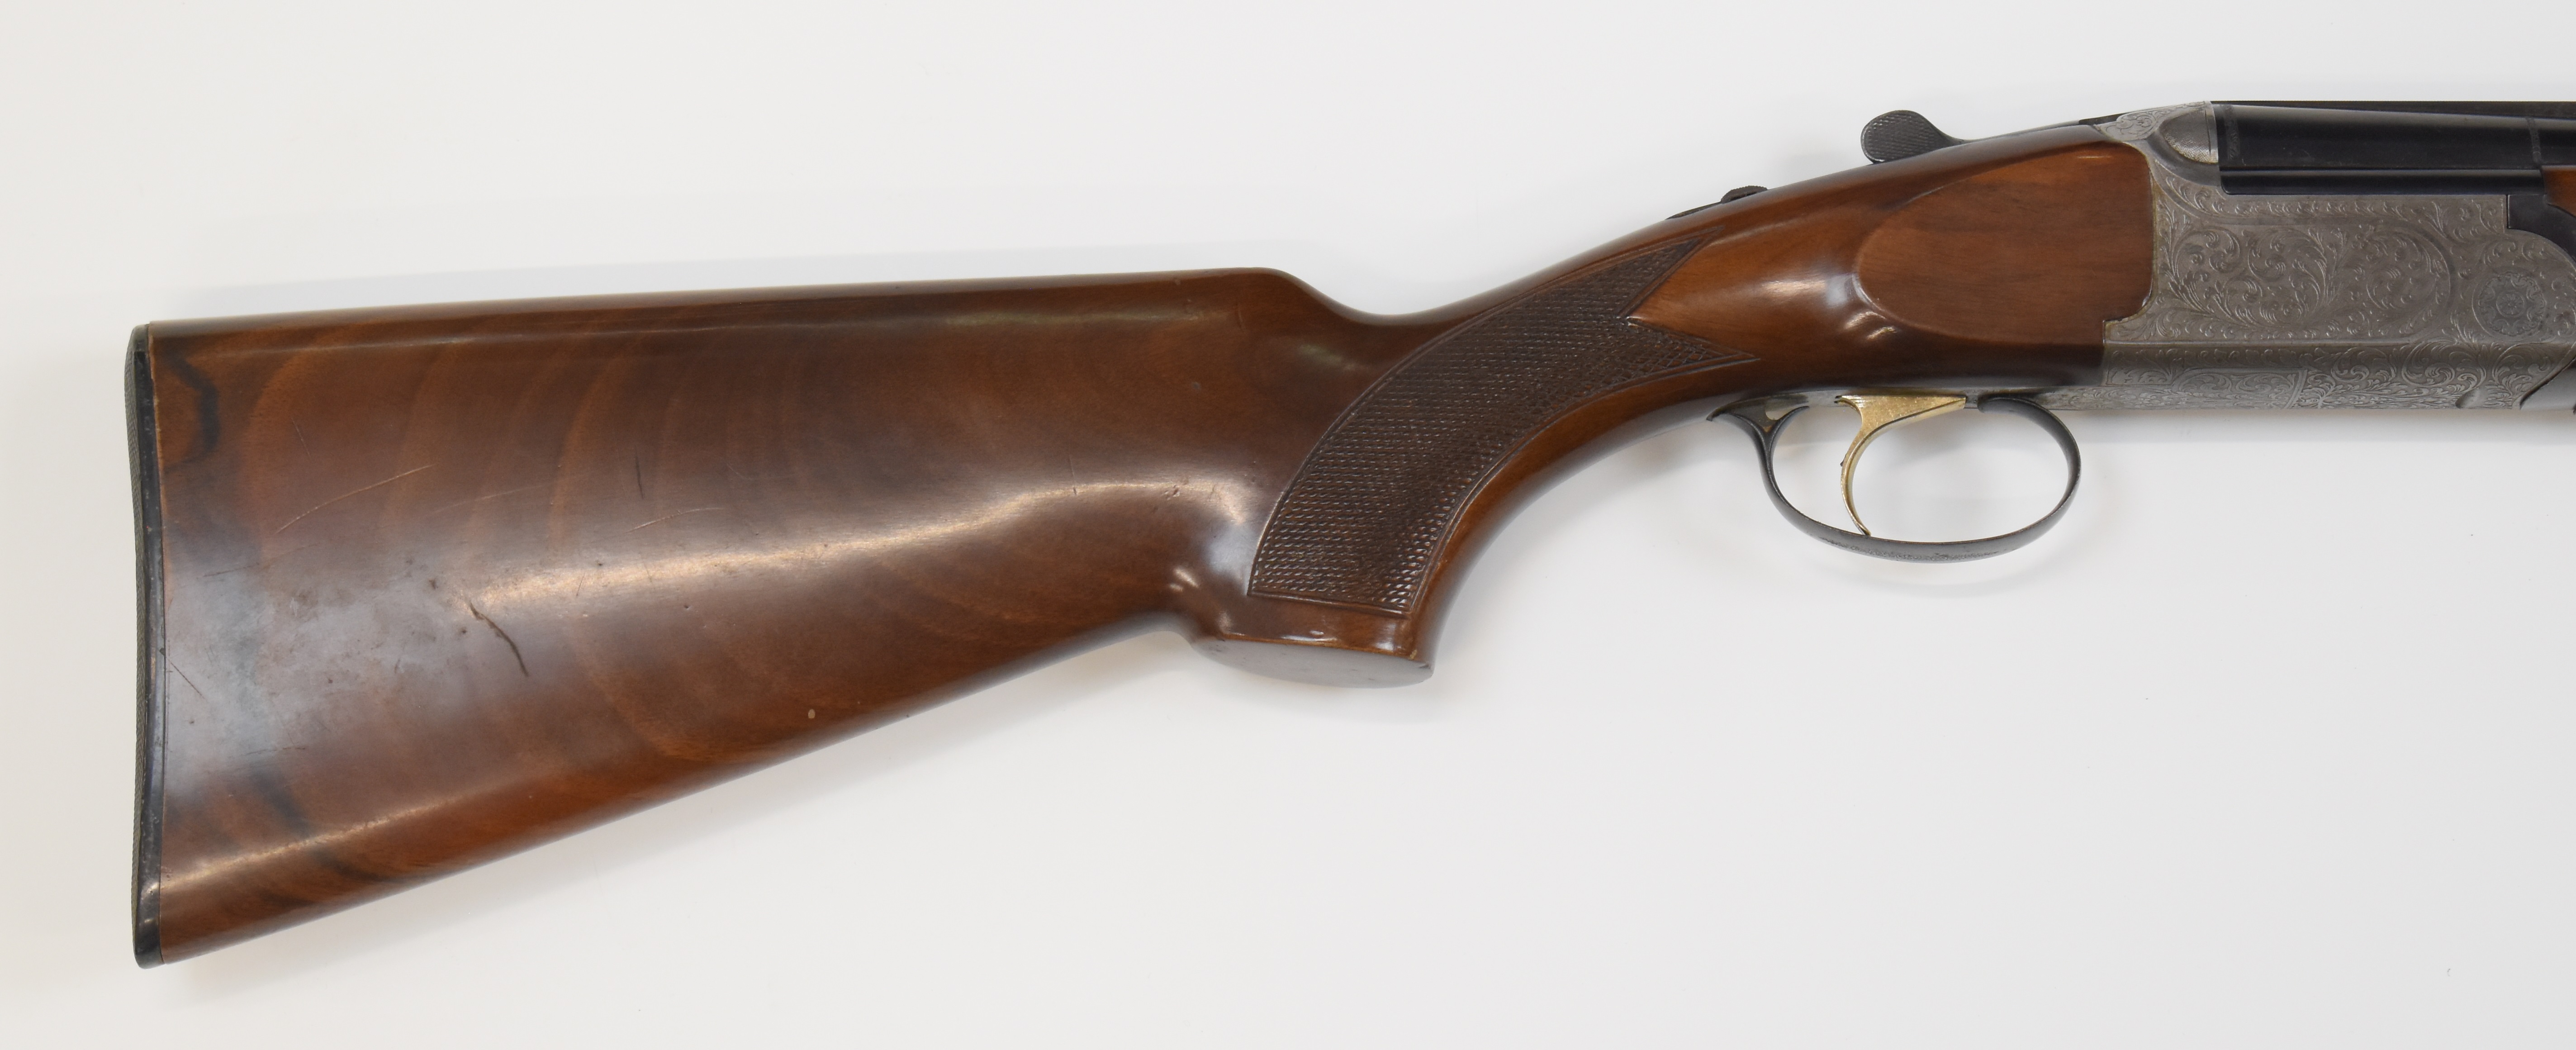 Sabatti 12 bore over under ejector shotgun with engraved lock, underside, top plate, trigger guard - Image 3 of 10